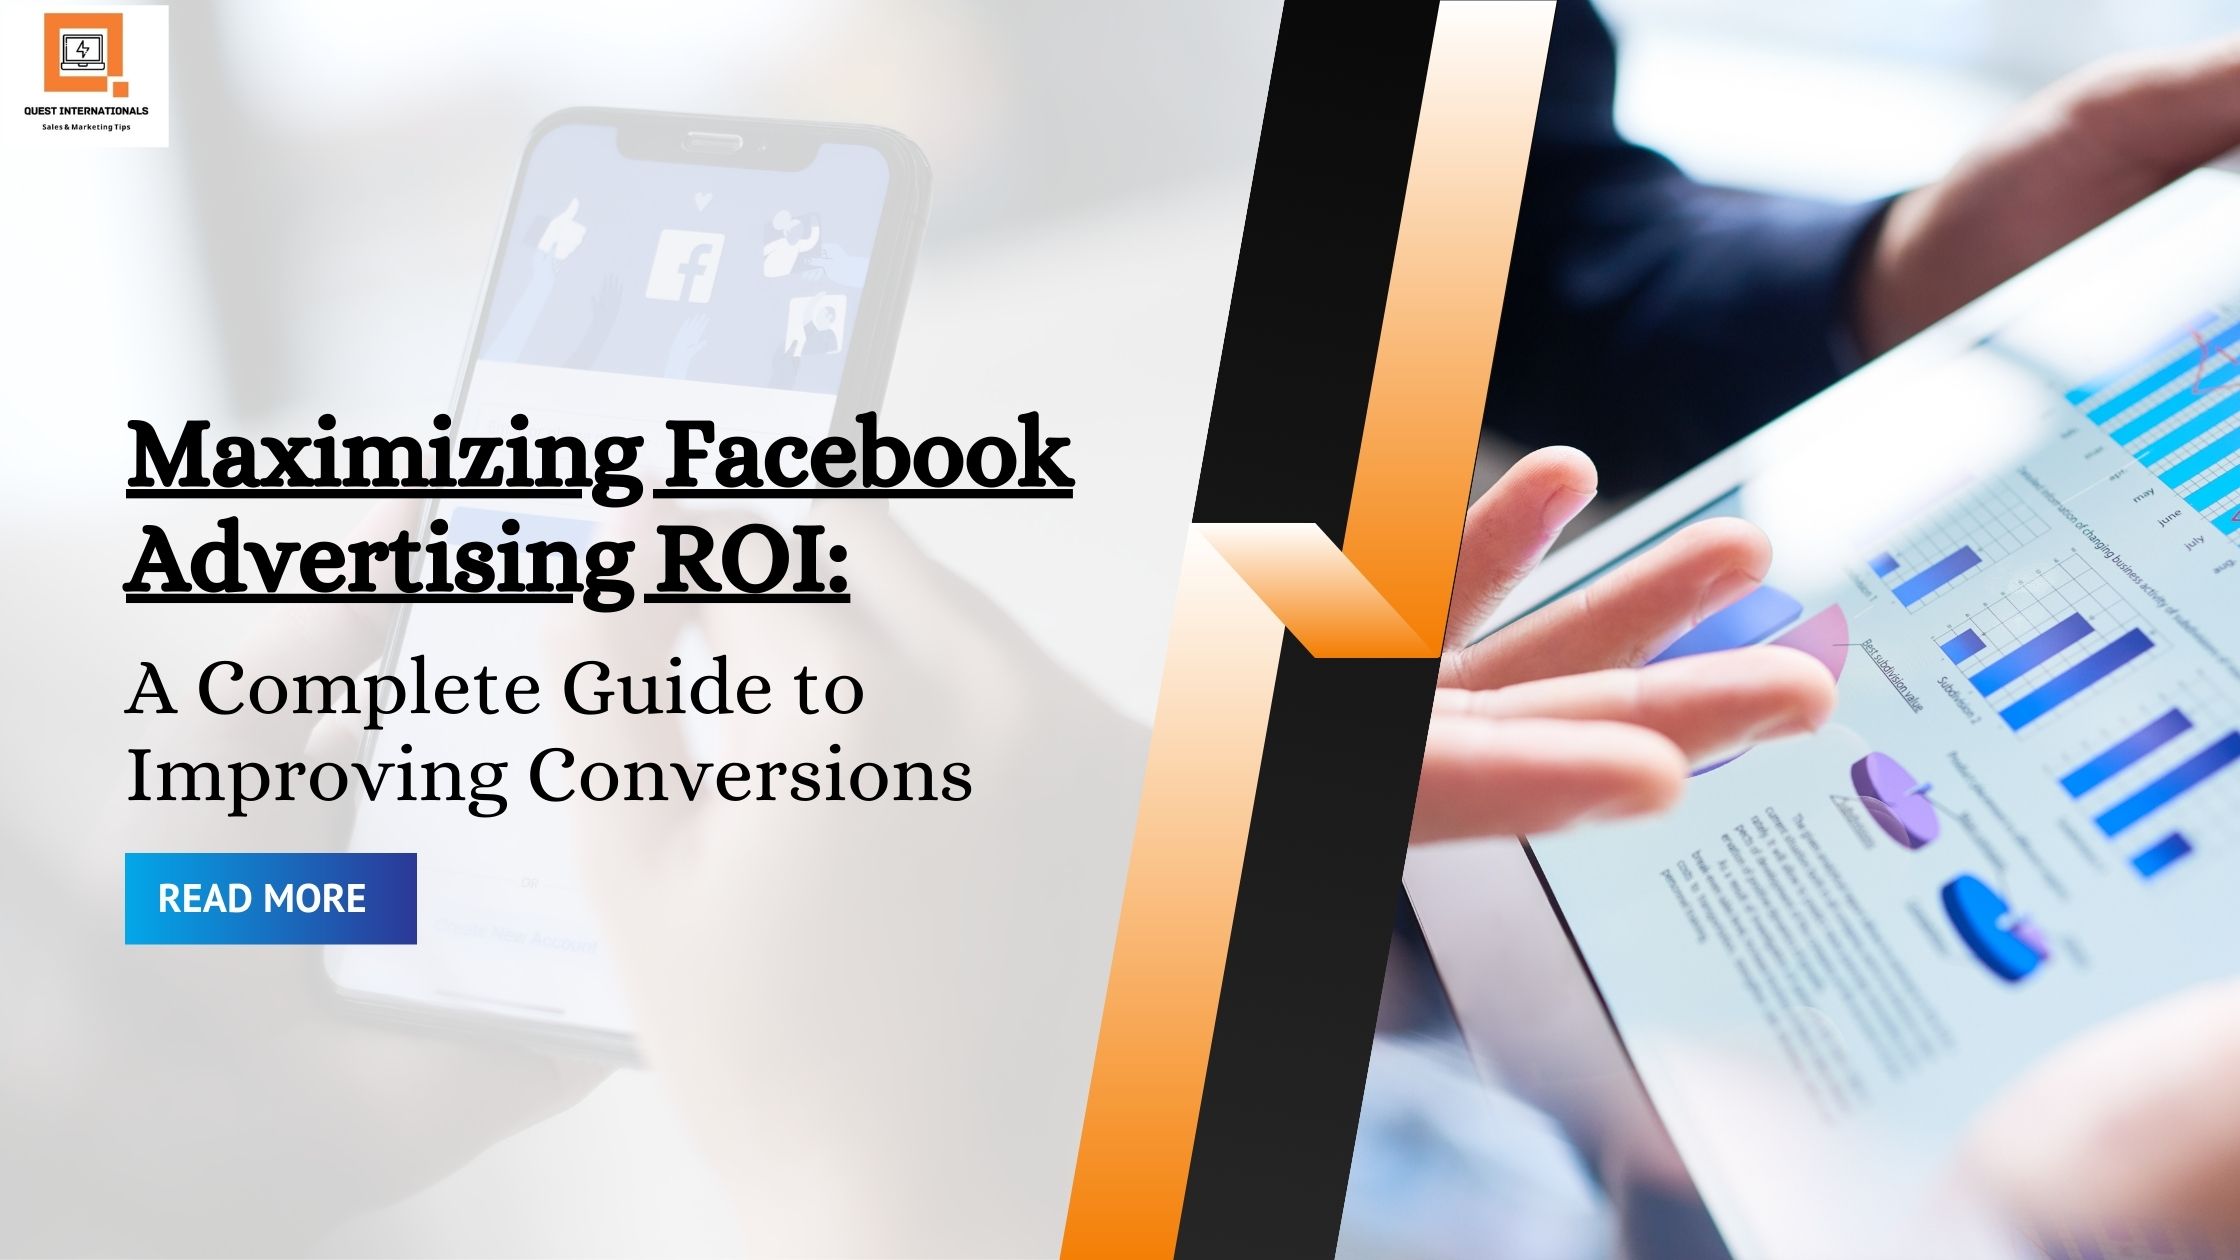 You are currently viewing Maximizing Facebook Advertising ROI: A Complete Guide to Improving Conversions